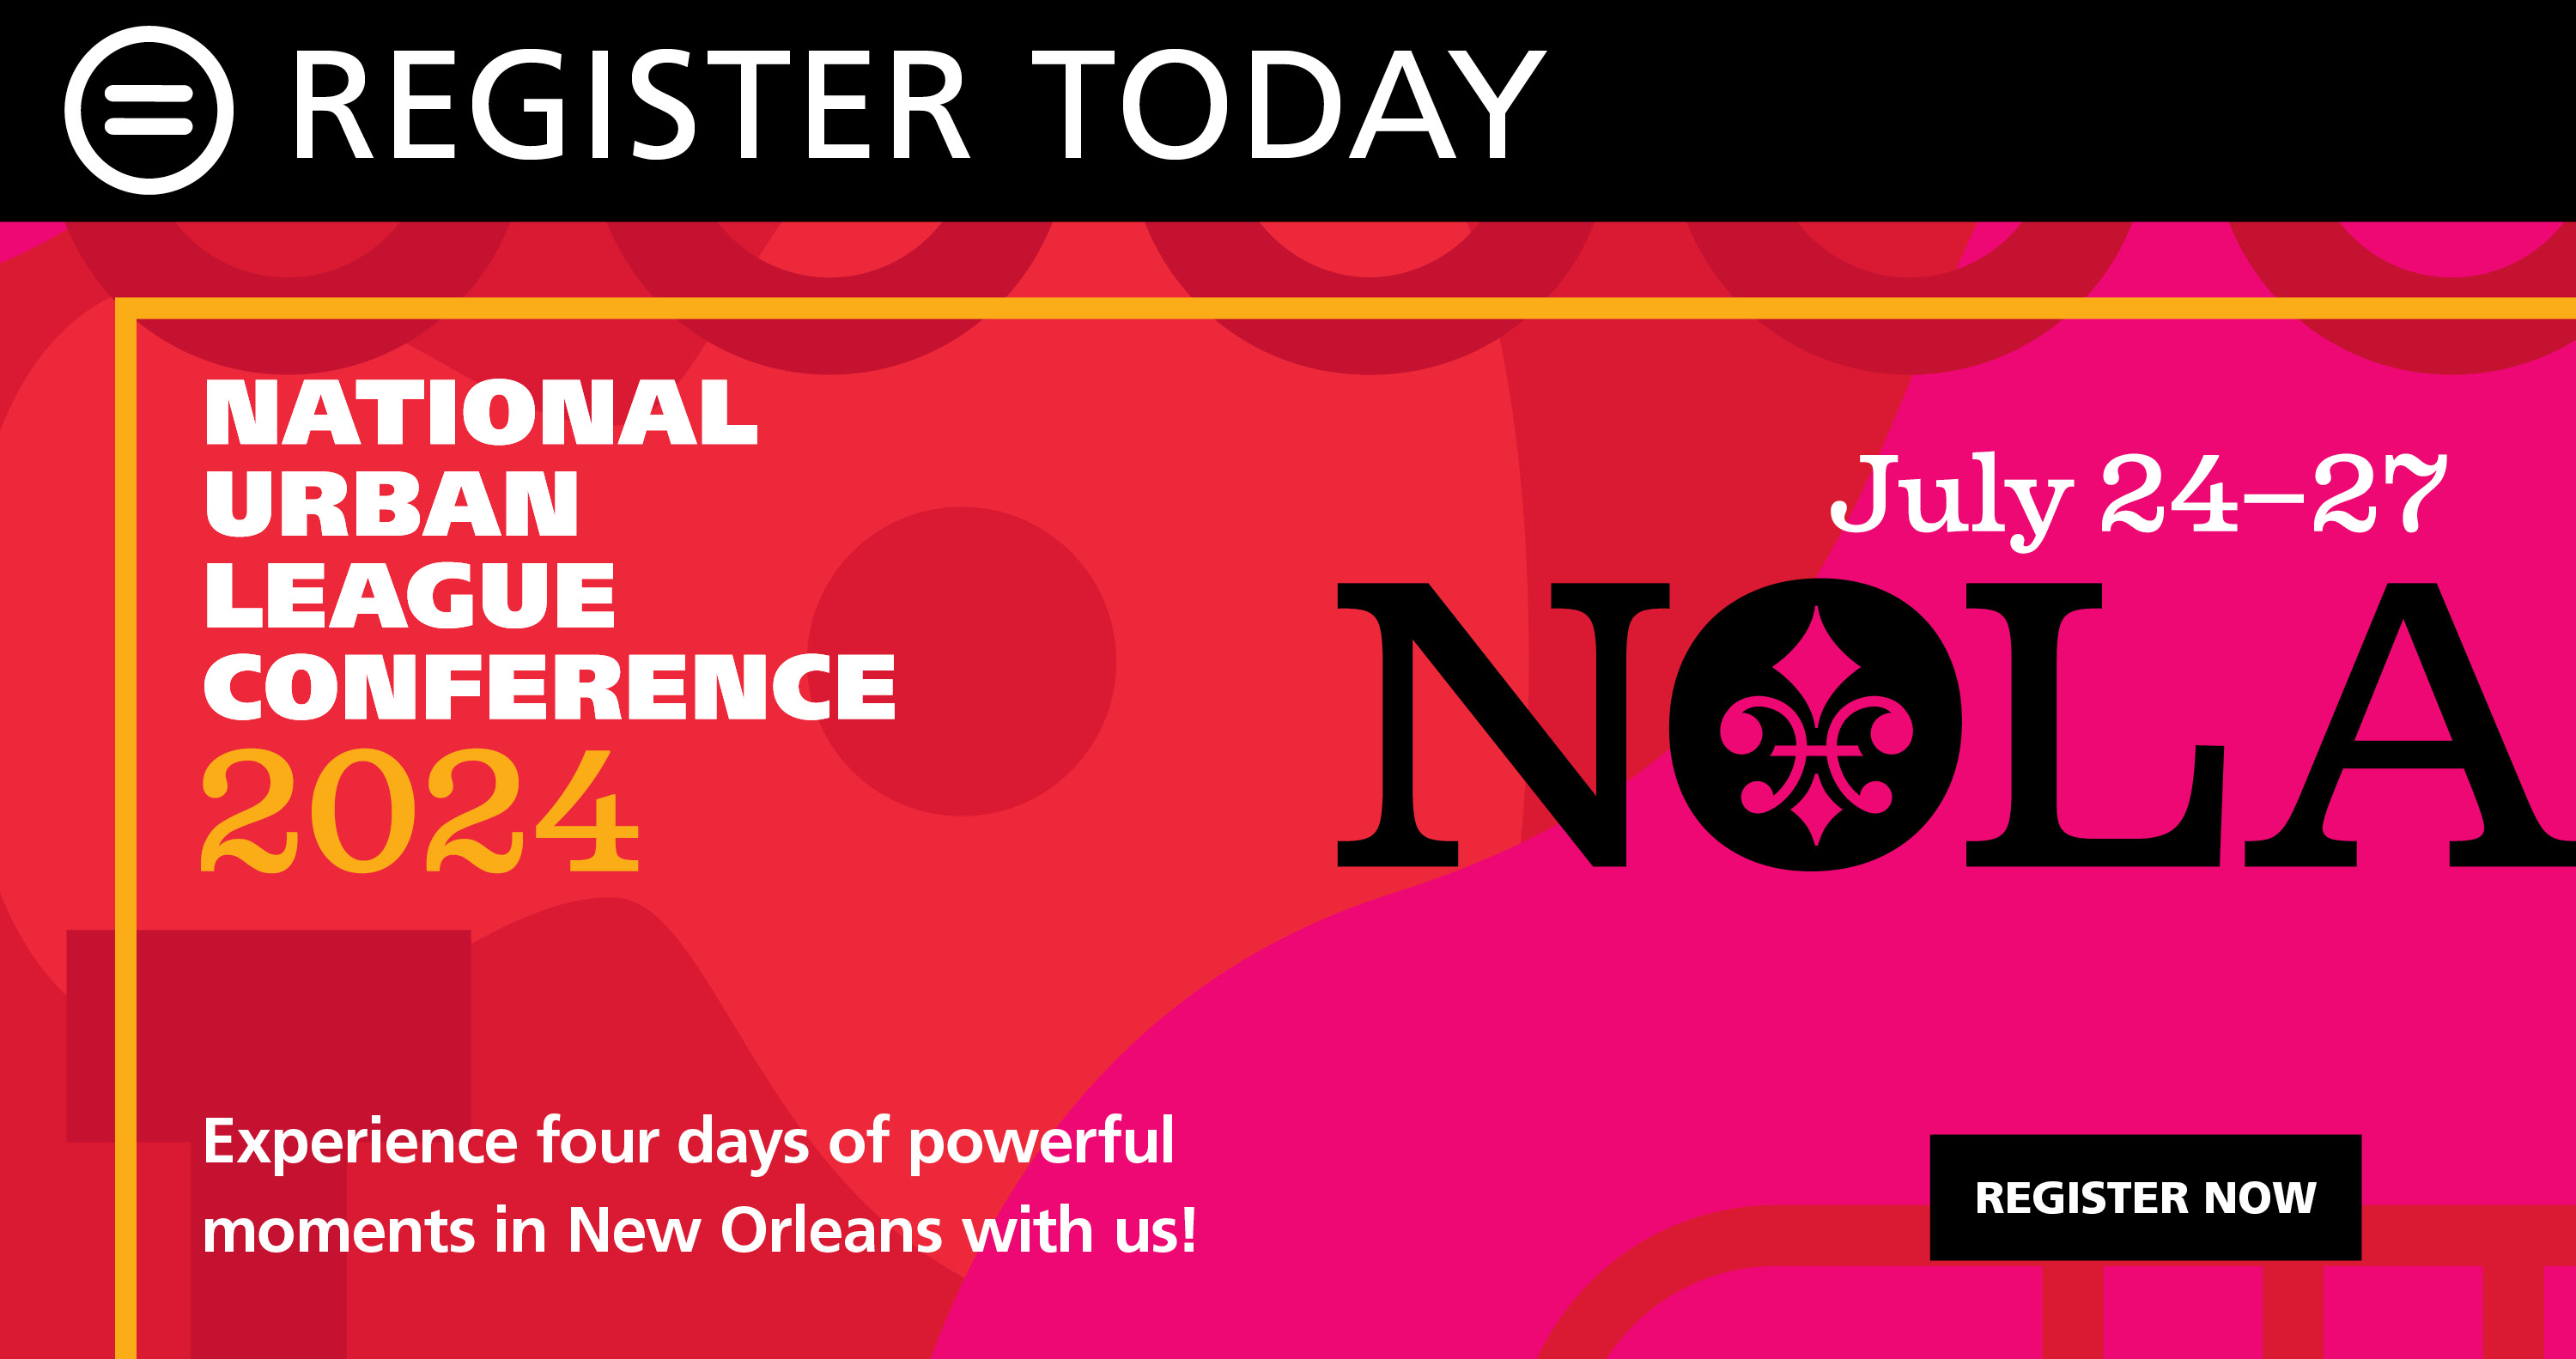 National Urban League Conference 2024 Register Now and Save